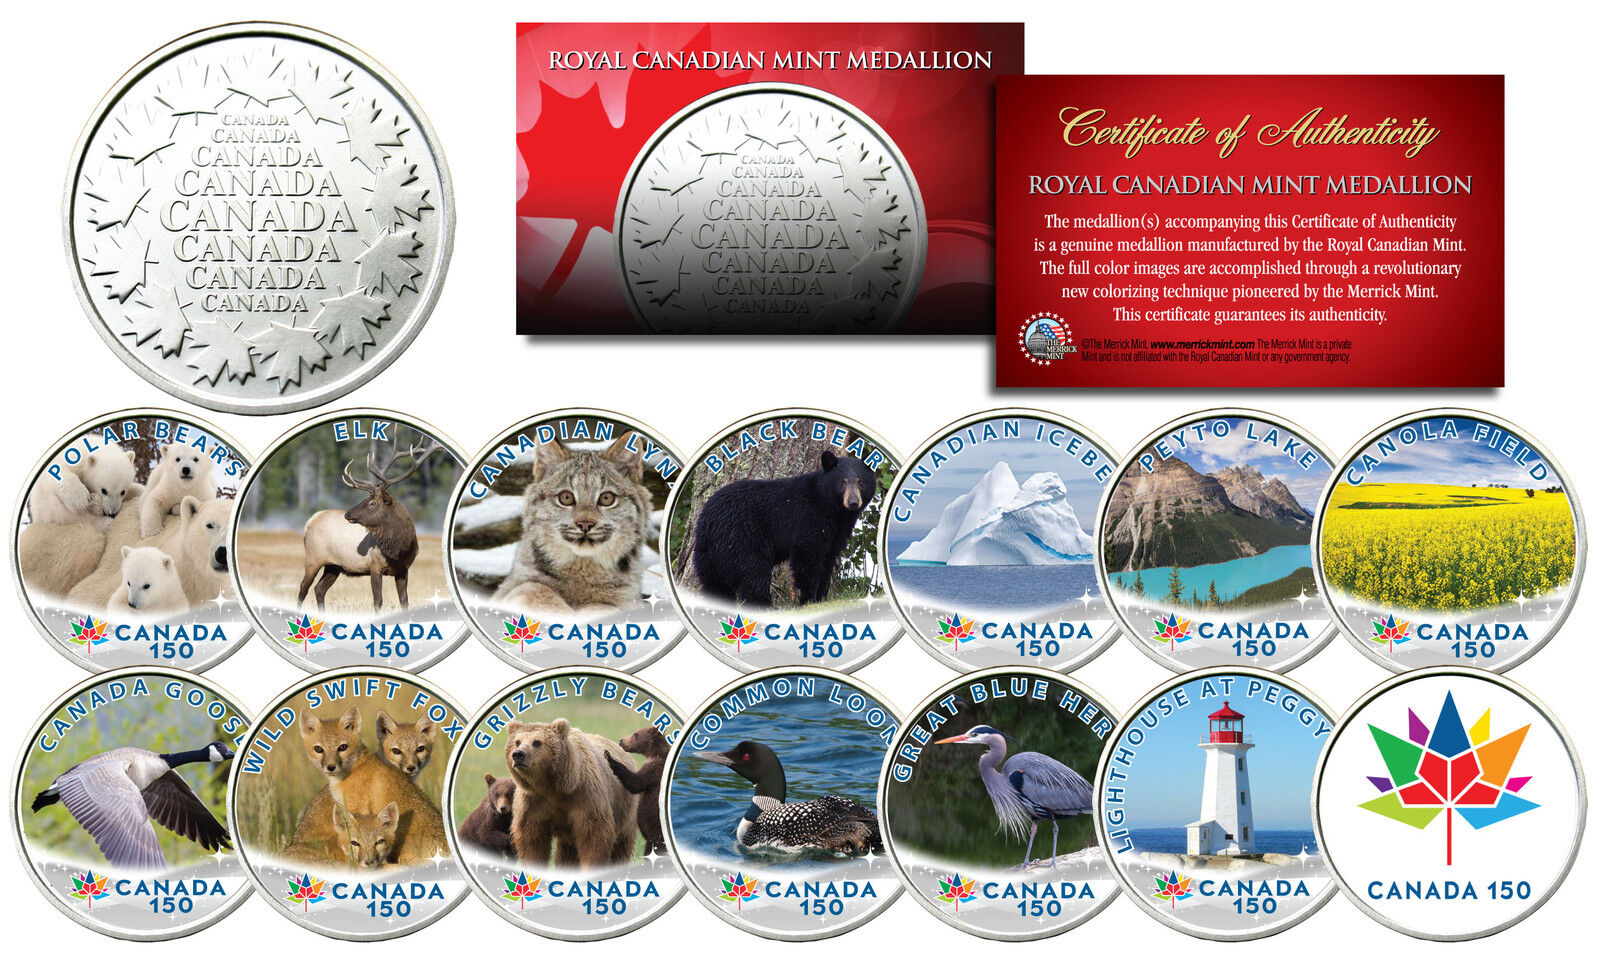 CANADA 150 ANNIVERSARY RCM Royal Canadian Color Medallions SET of 14 - WILDLIFE 